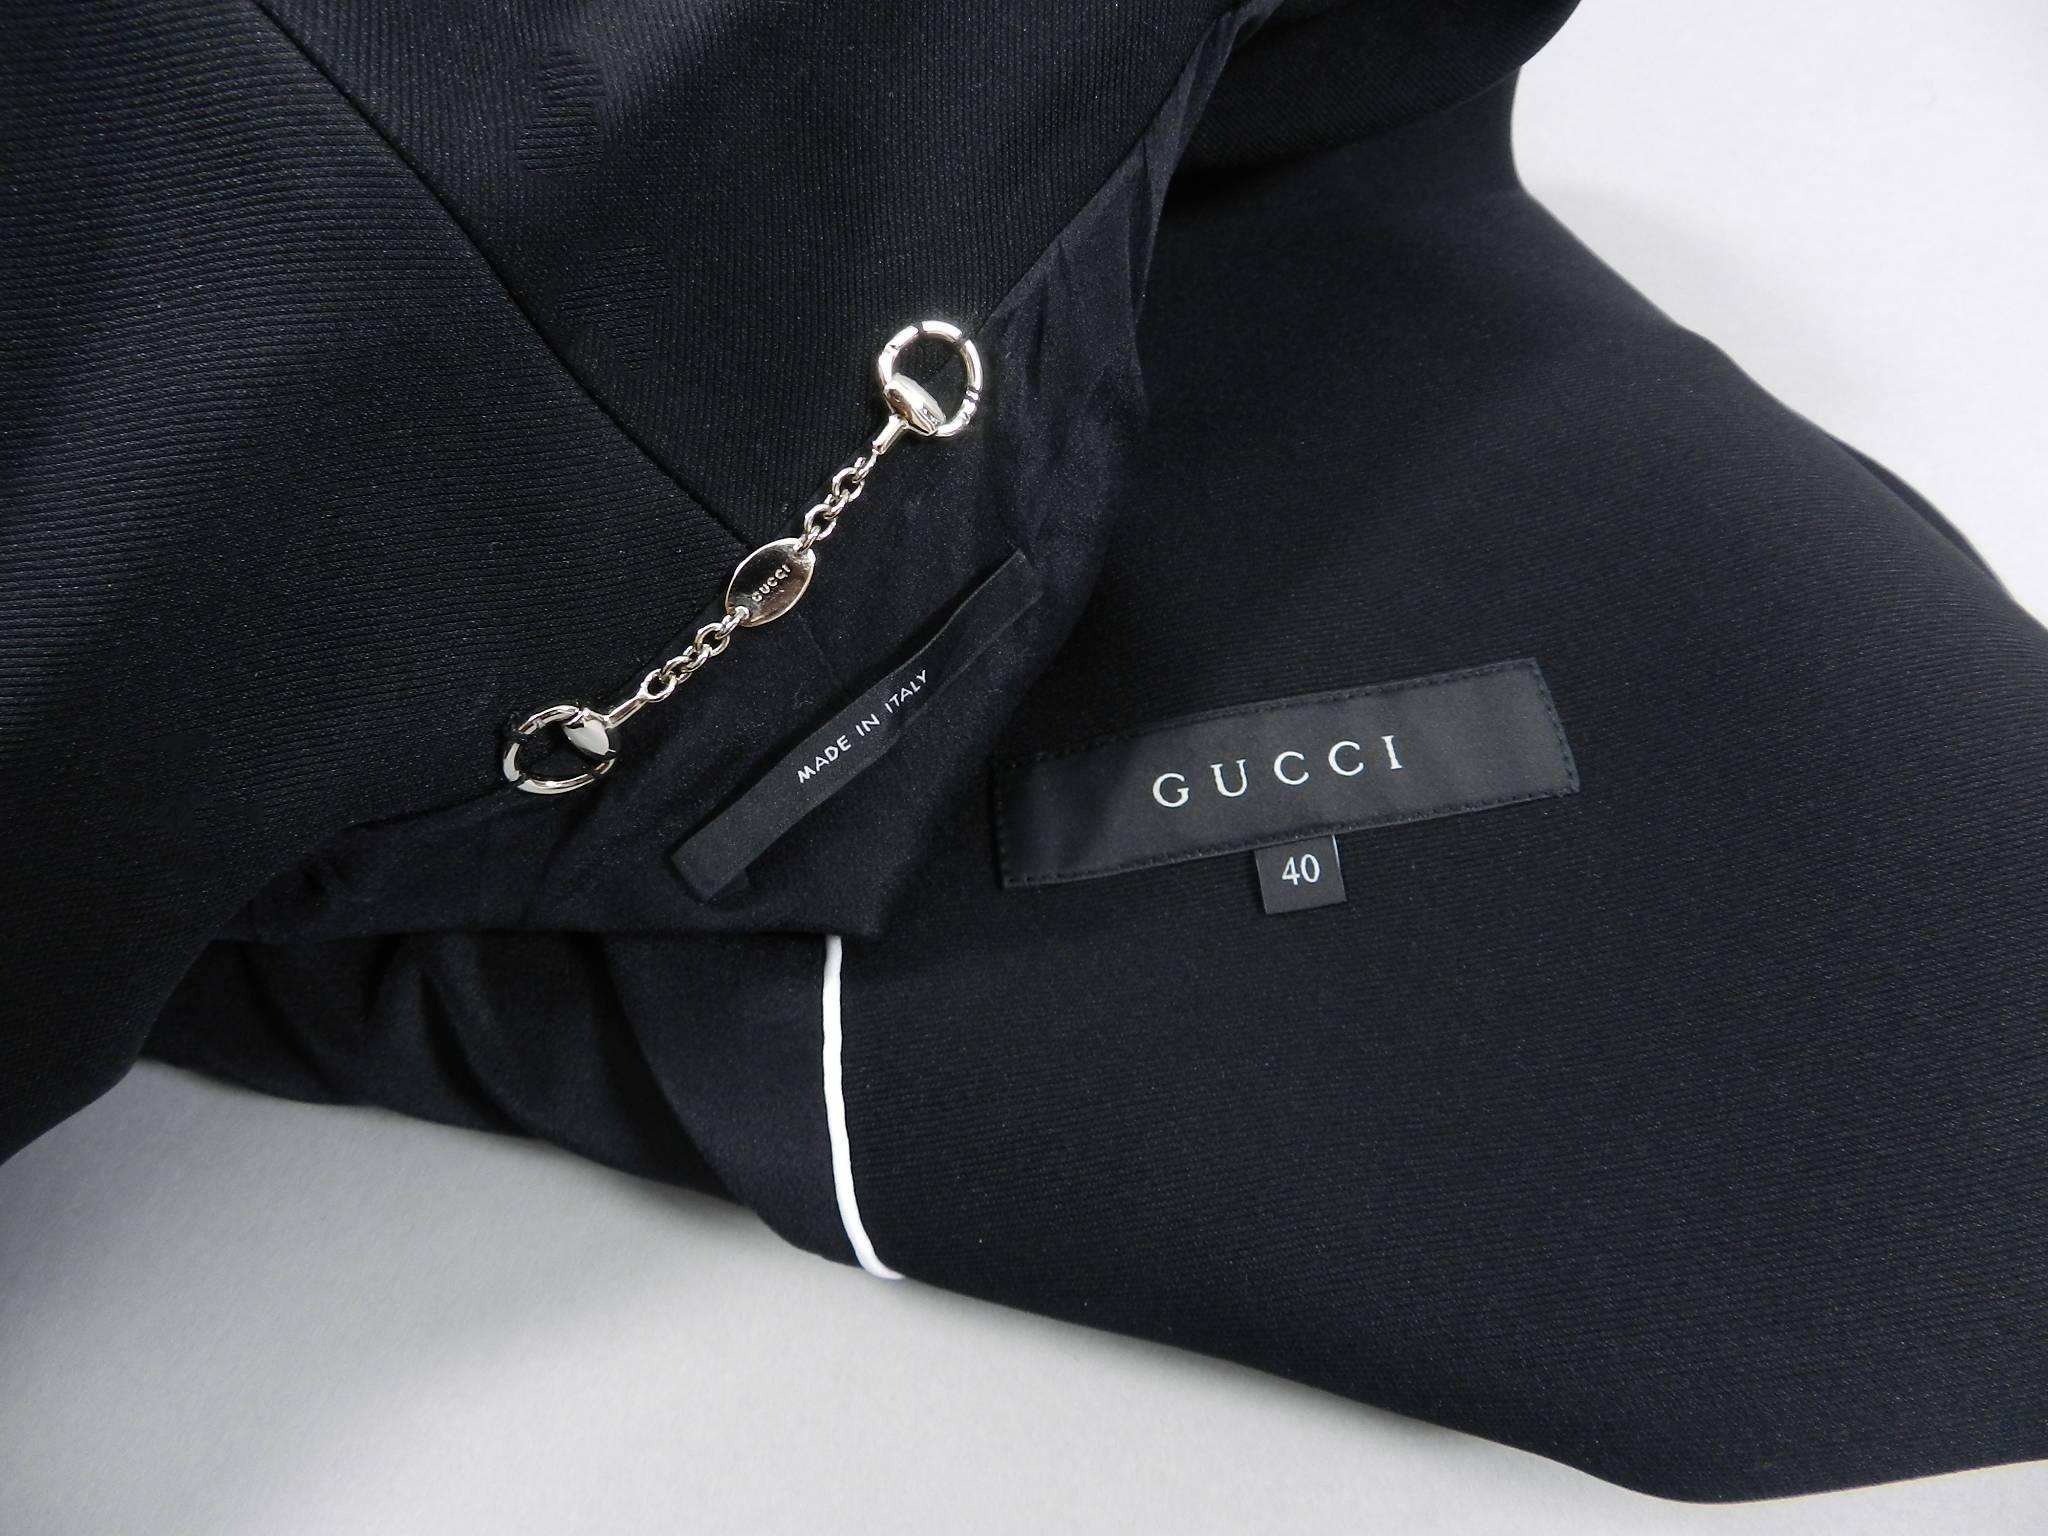 Gucci pre-fall 2014 Black Dress coat with Silver Buttons 4